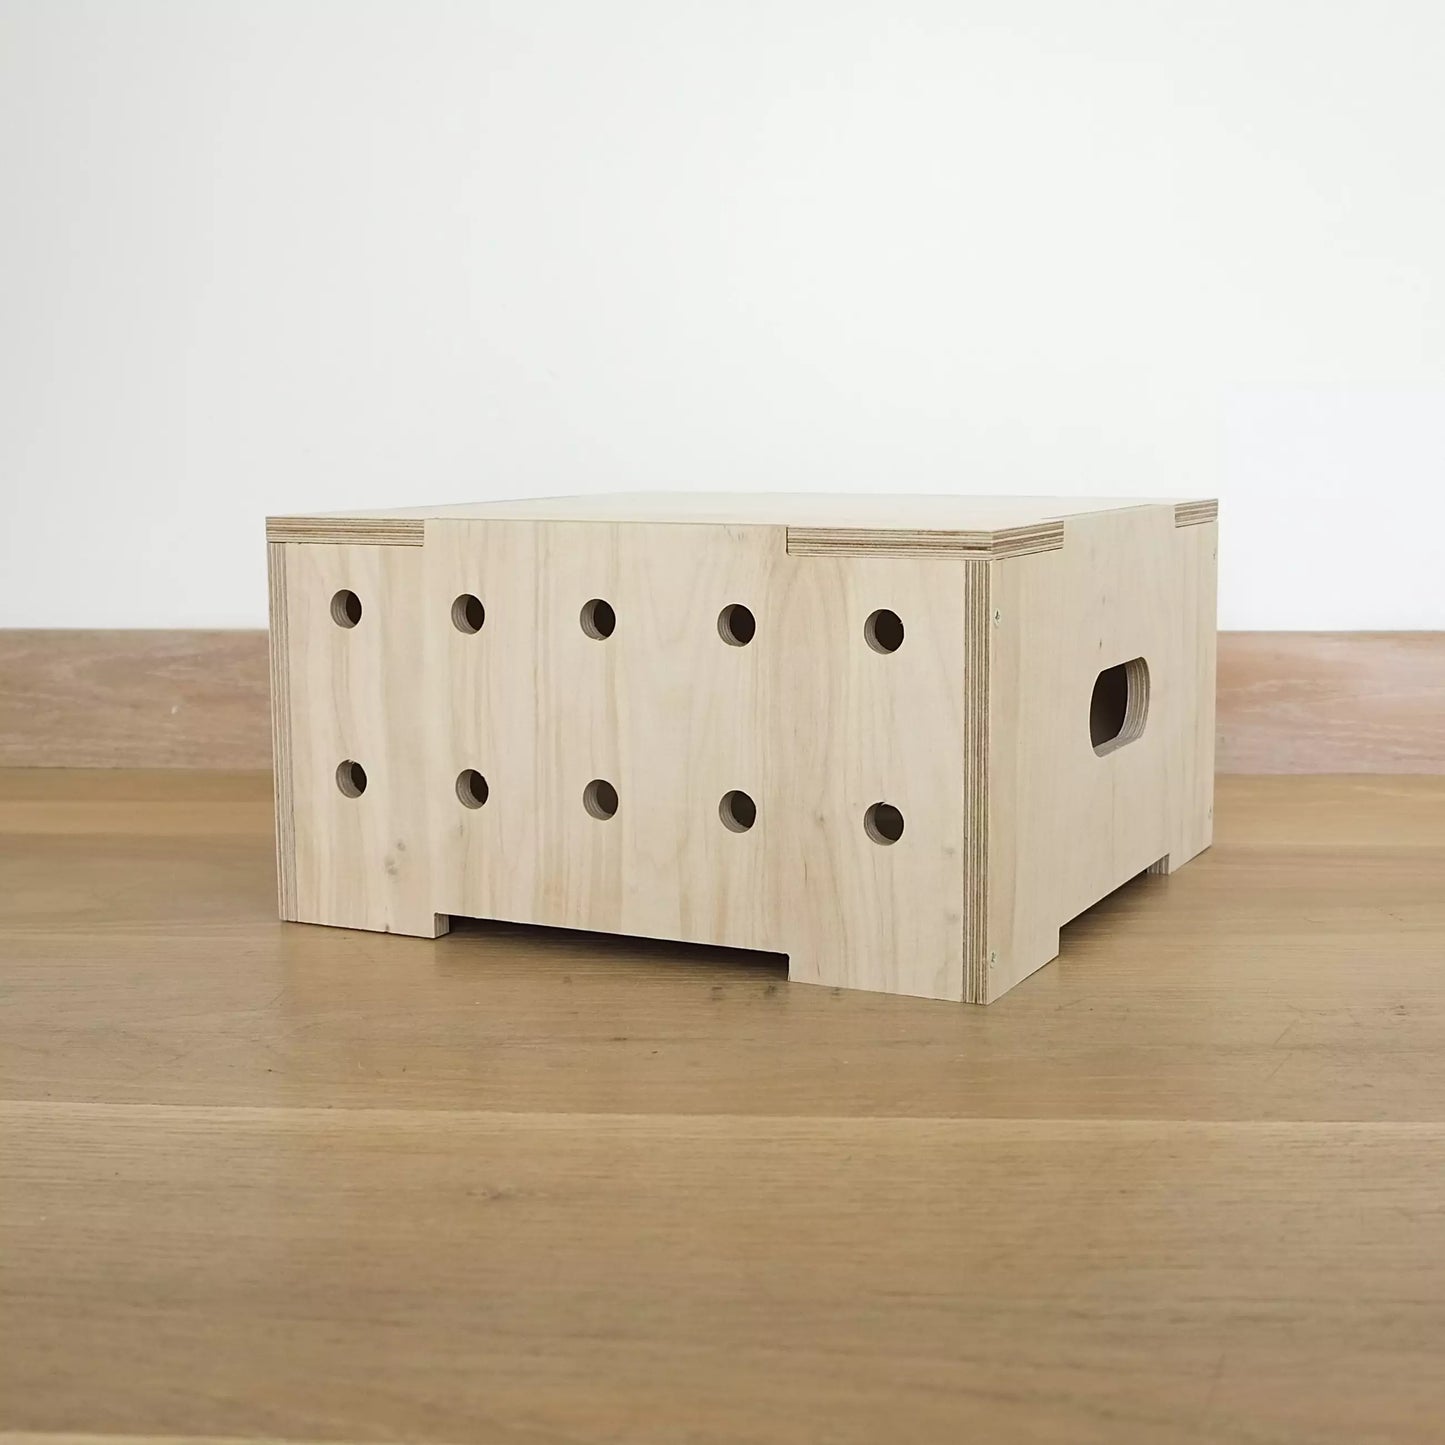 A modern pale wooden square crate with two rows of holes in front, with lid. It faces diagonally to left and sits on wooden floor.